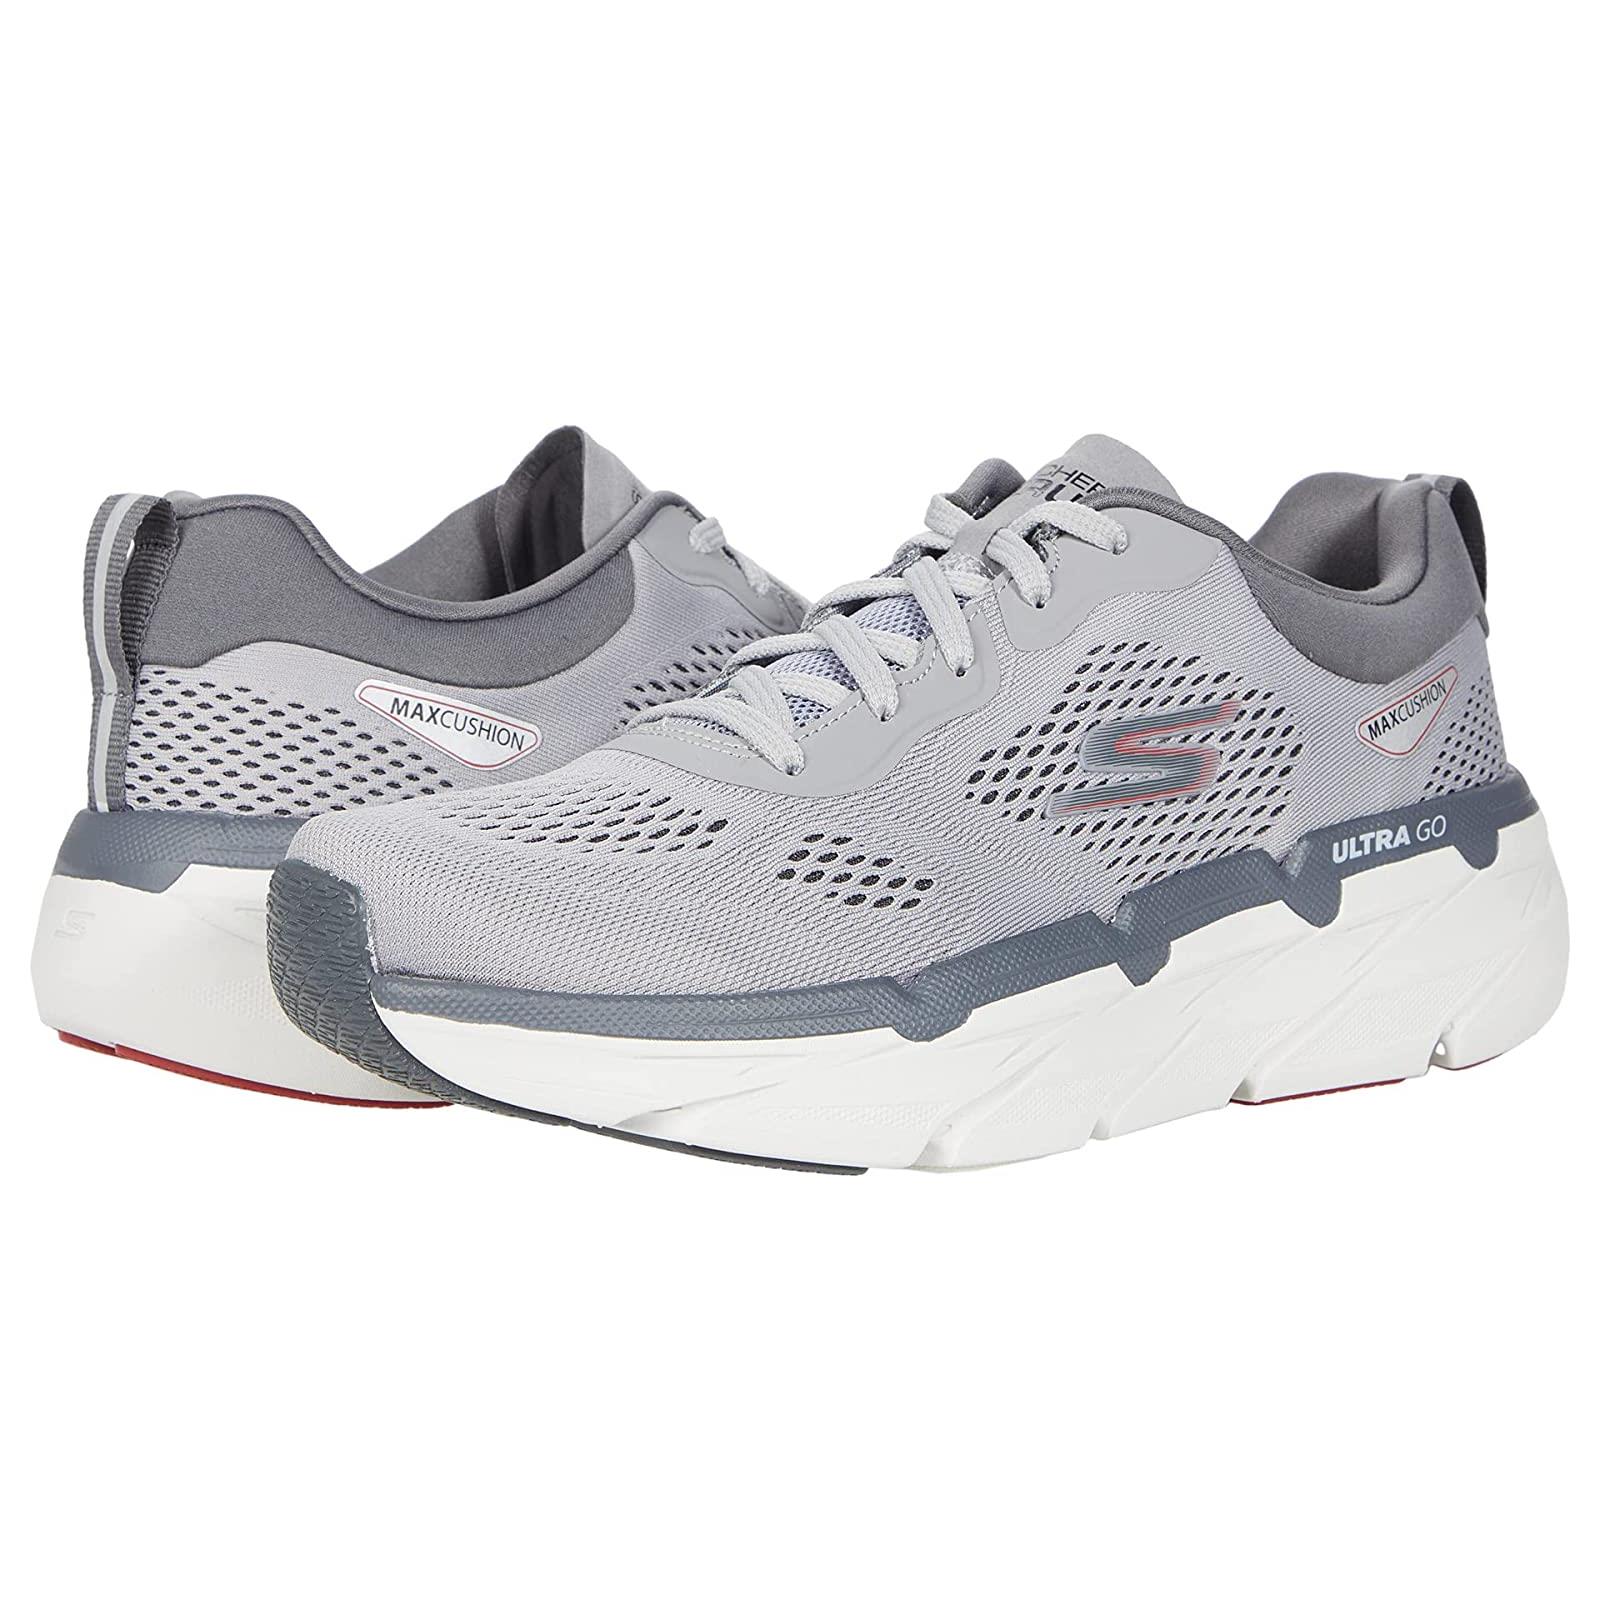 Man`s Shoes Skechers Max Cushioning Premier - Perspective Grey/Red